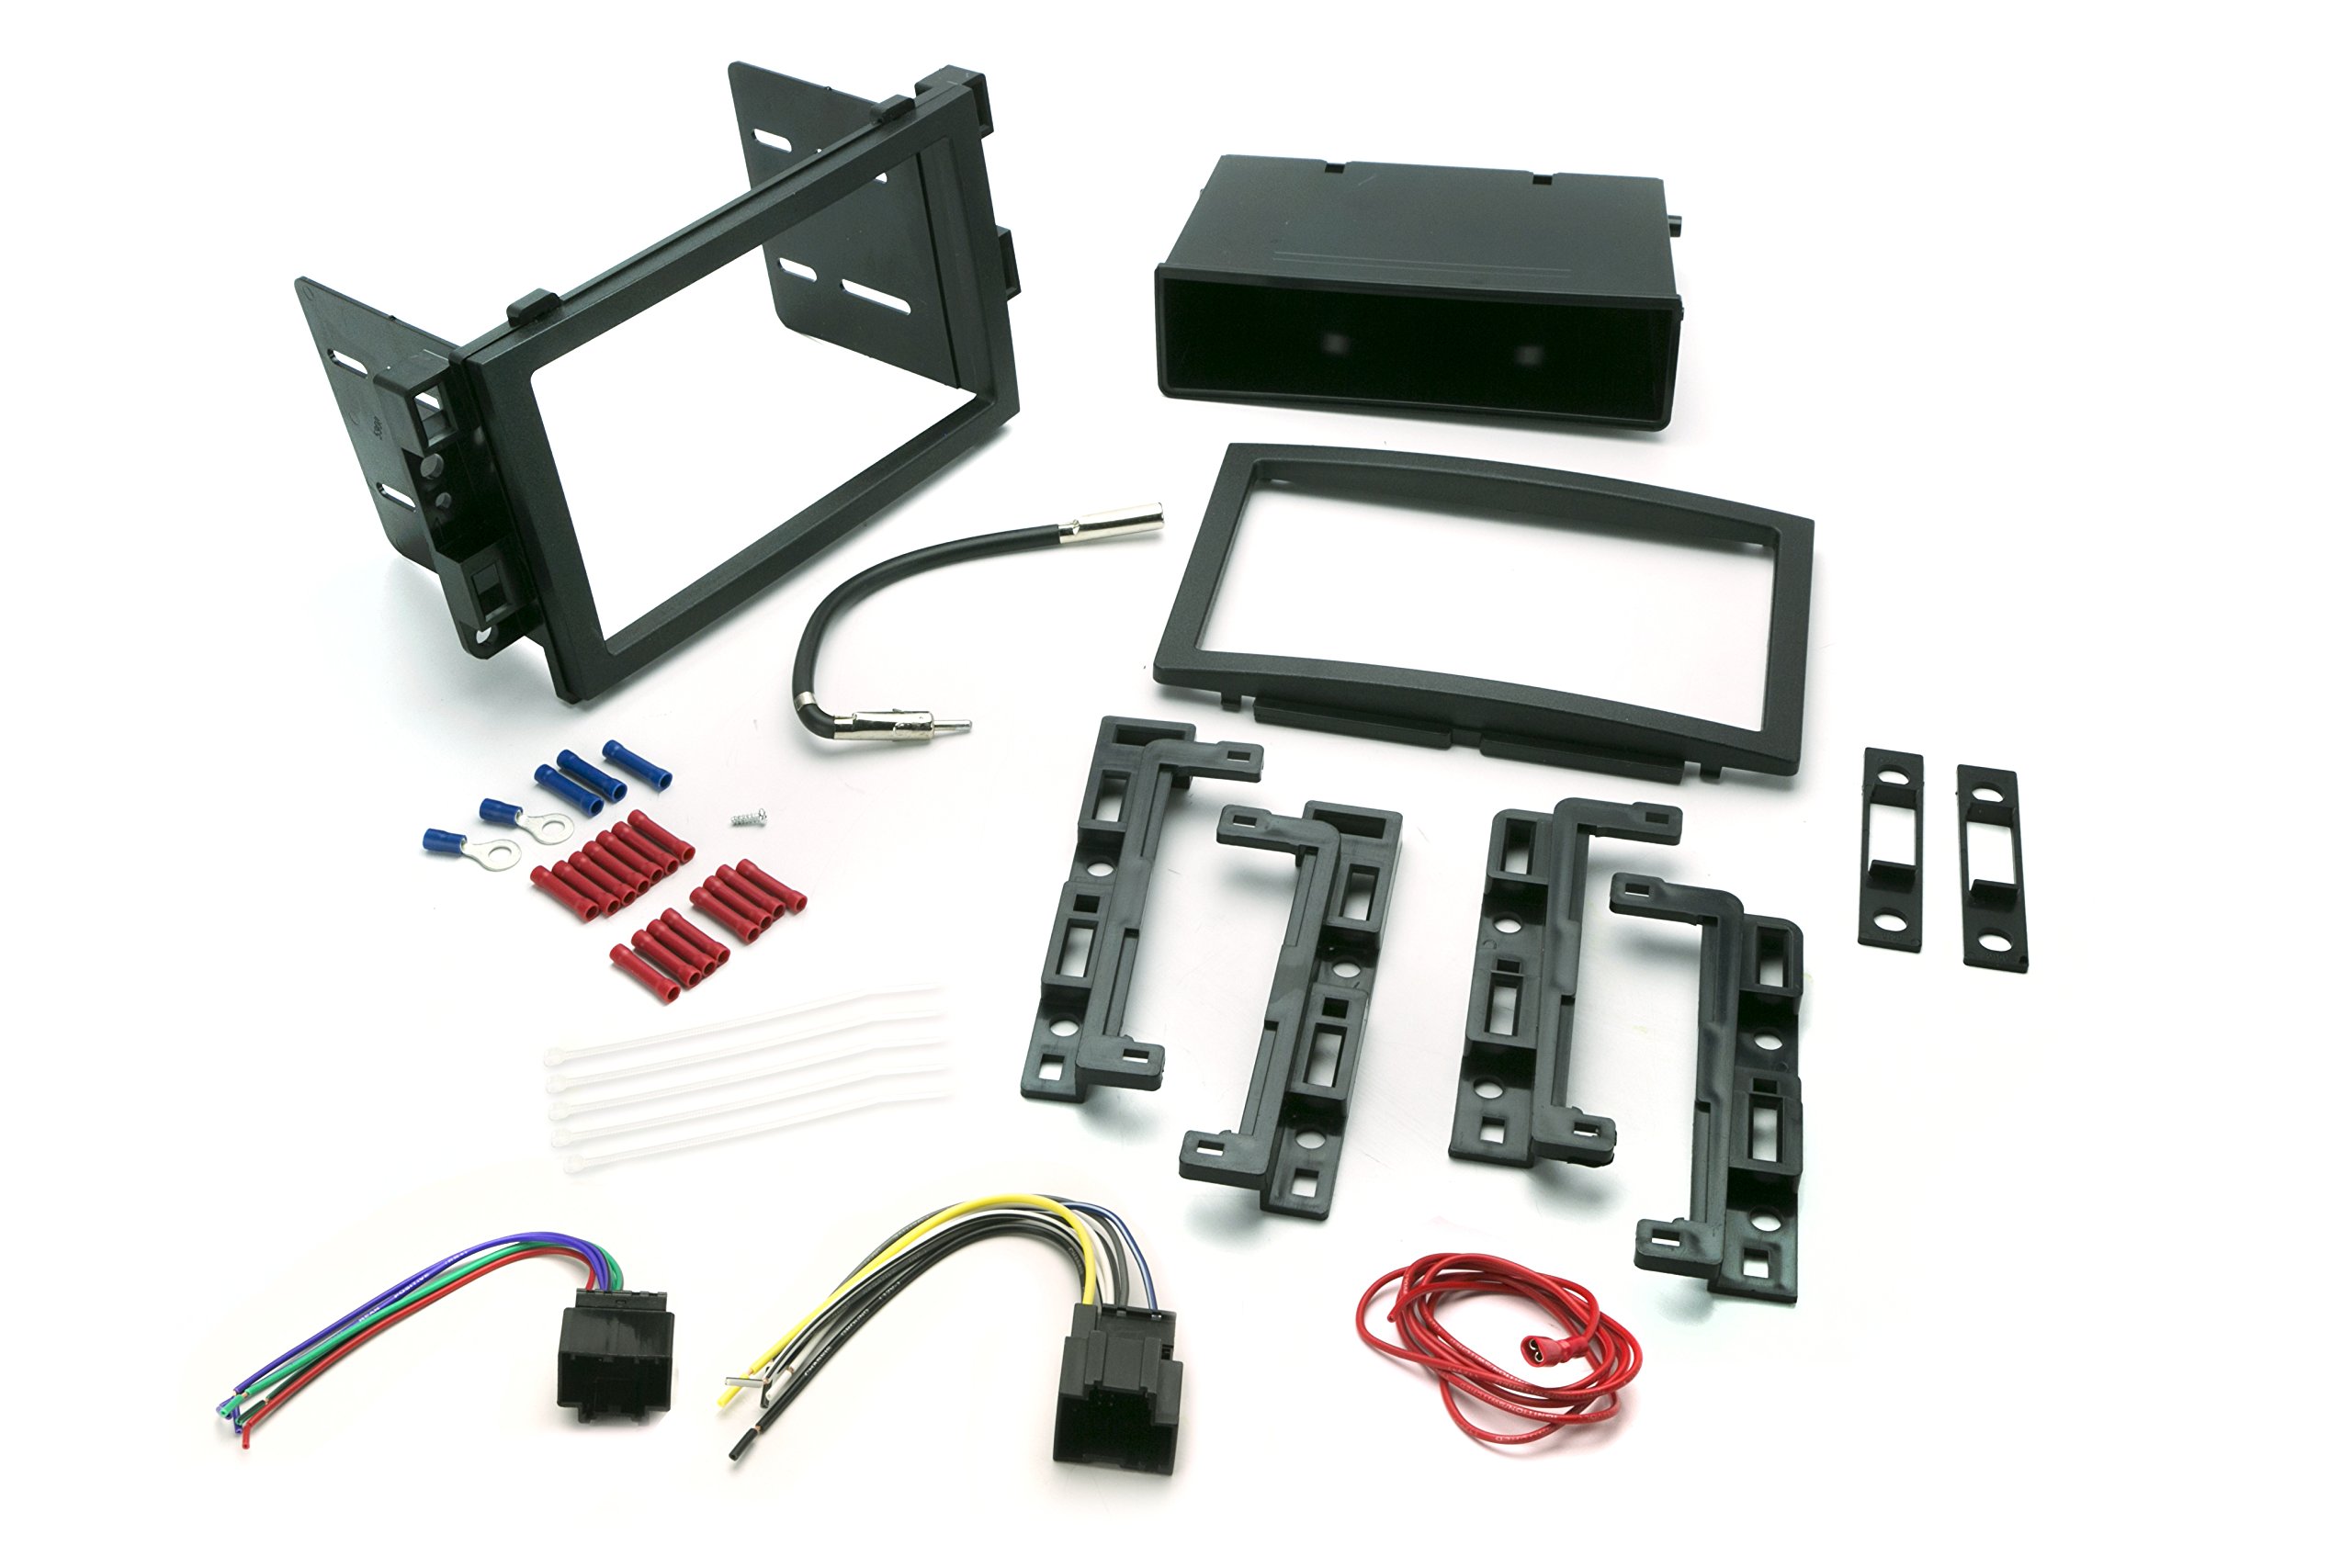 SCOSCHE Install Centric ICGM10BN Compatible with Select GM 2006-17 LAN Double DIN Complete Basic Installation Solution for Installing an Aftermarket Stereo